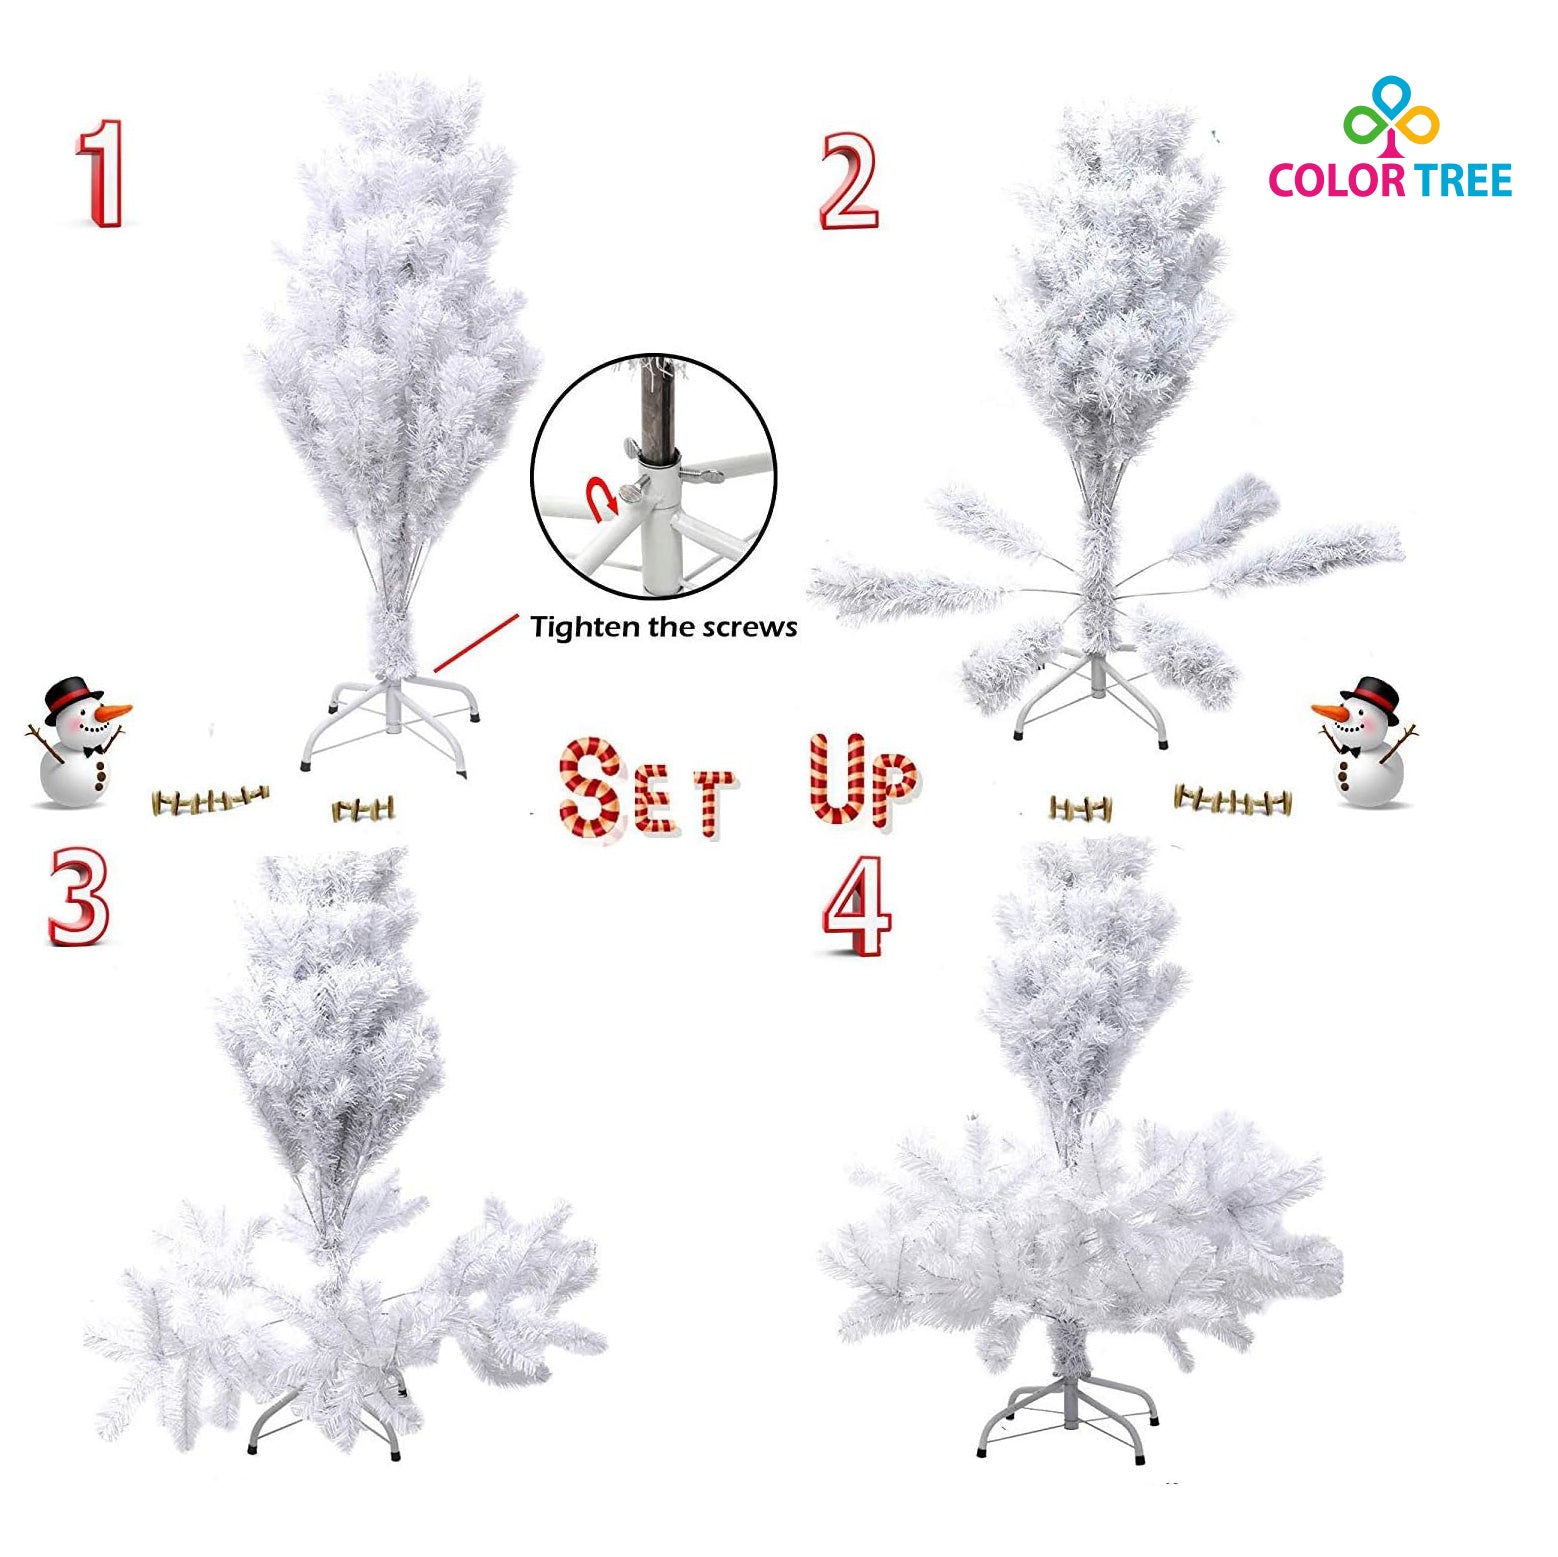 COLOR TREE 5 Feet Artificial Christmas Tree White Small Fake Xmas Tree Realistic Pine Trees with Solid Metal Stand and Holiday Decorations,450 Tips